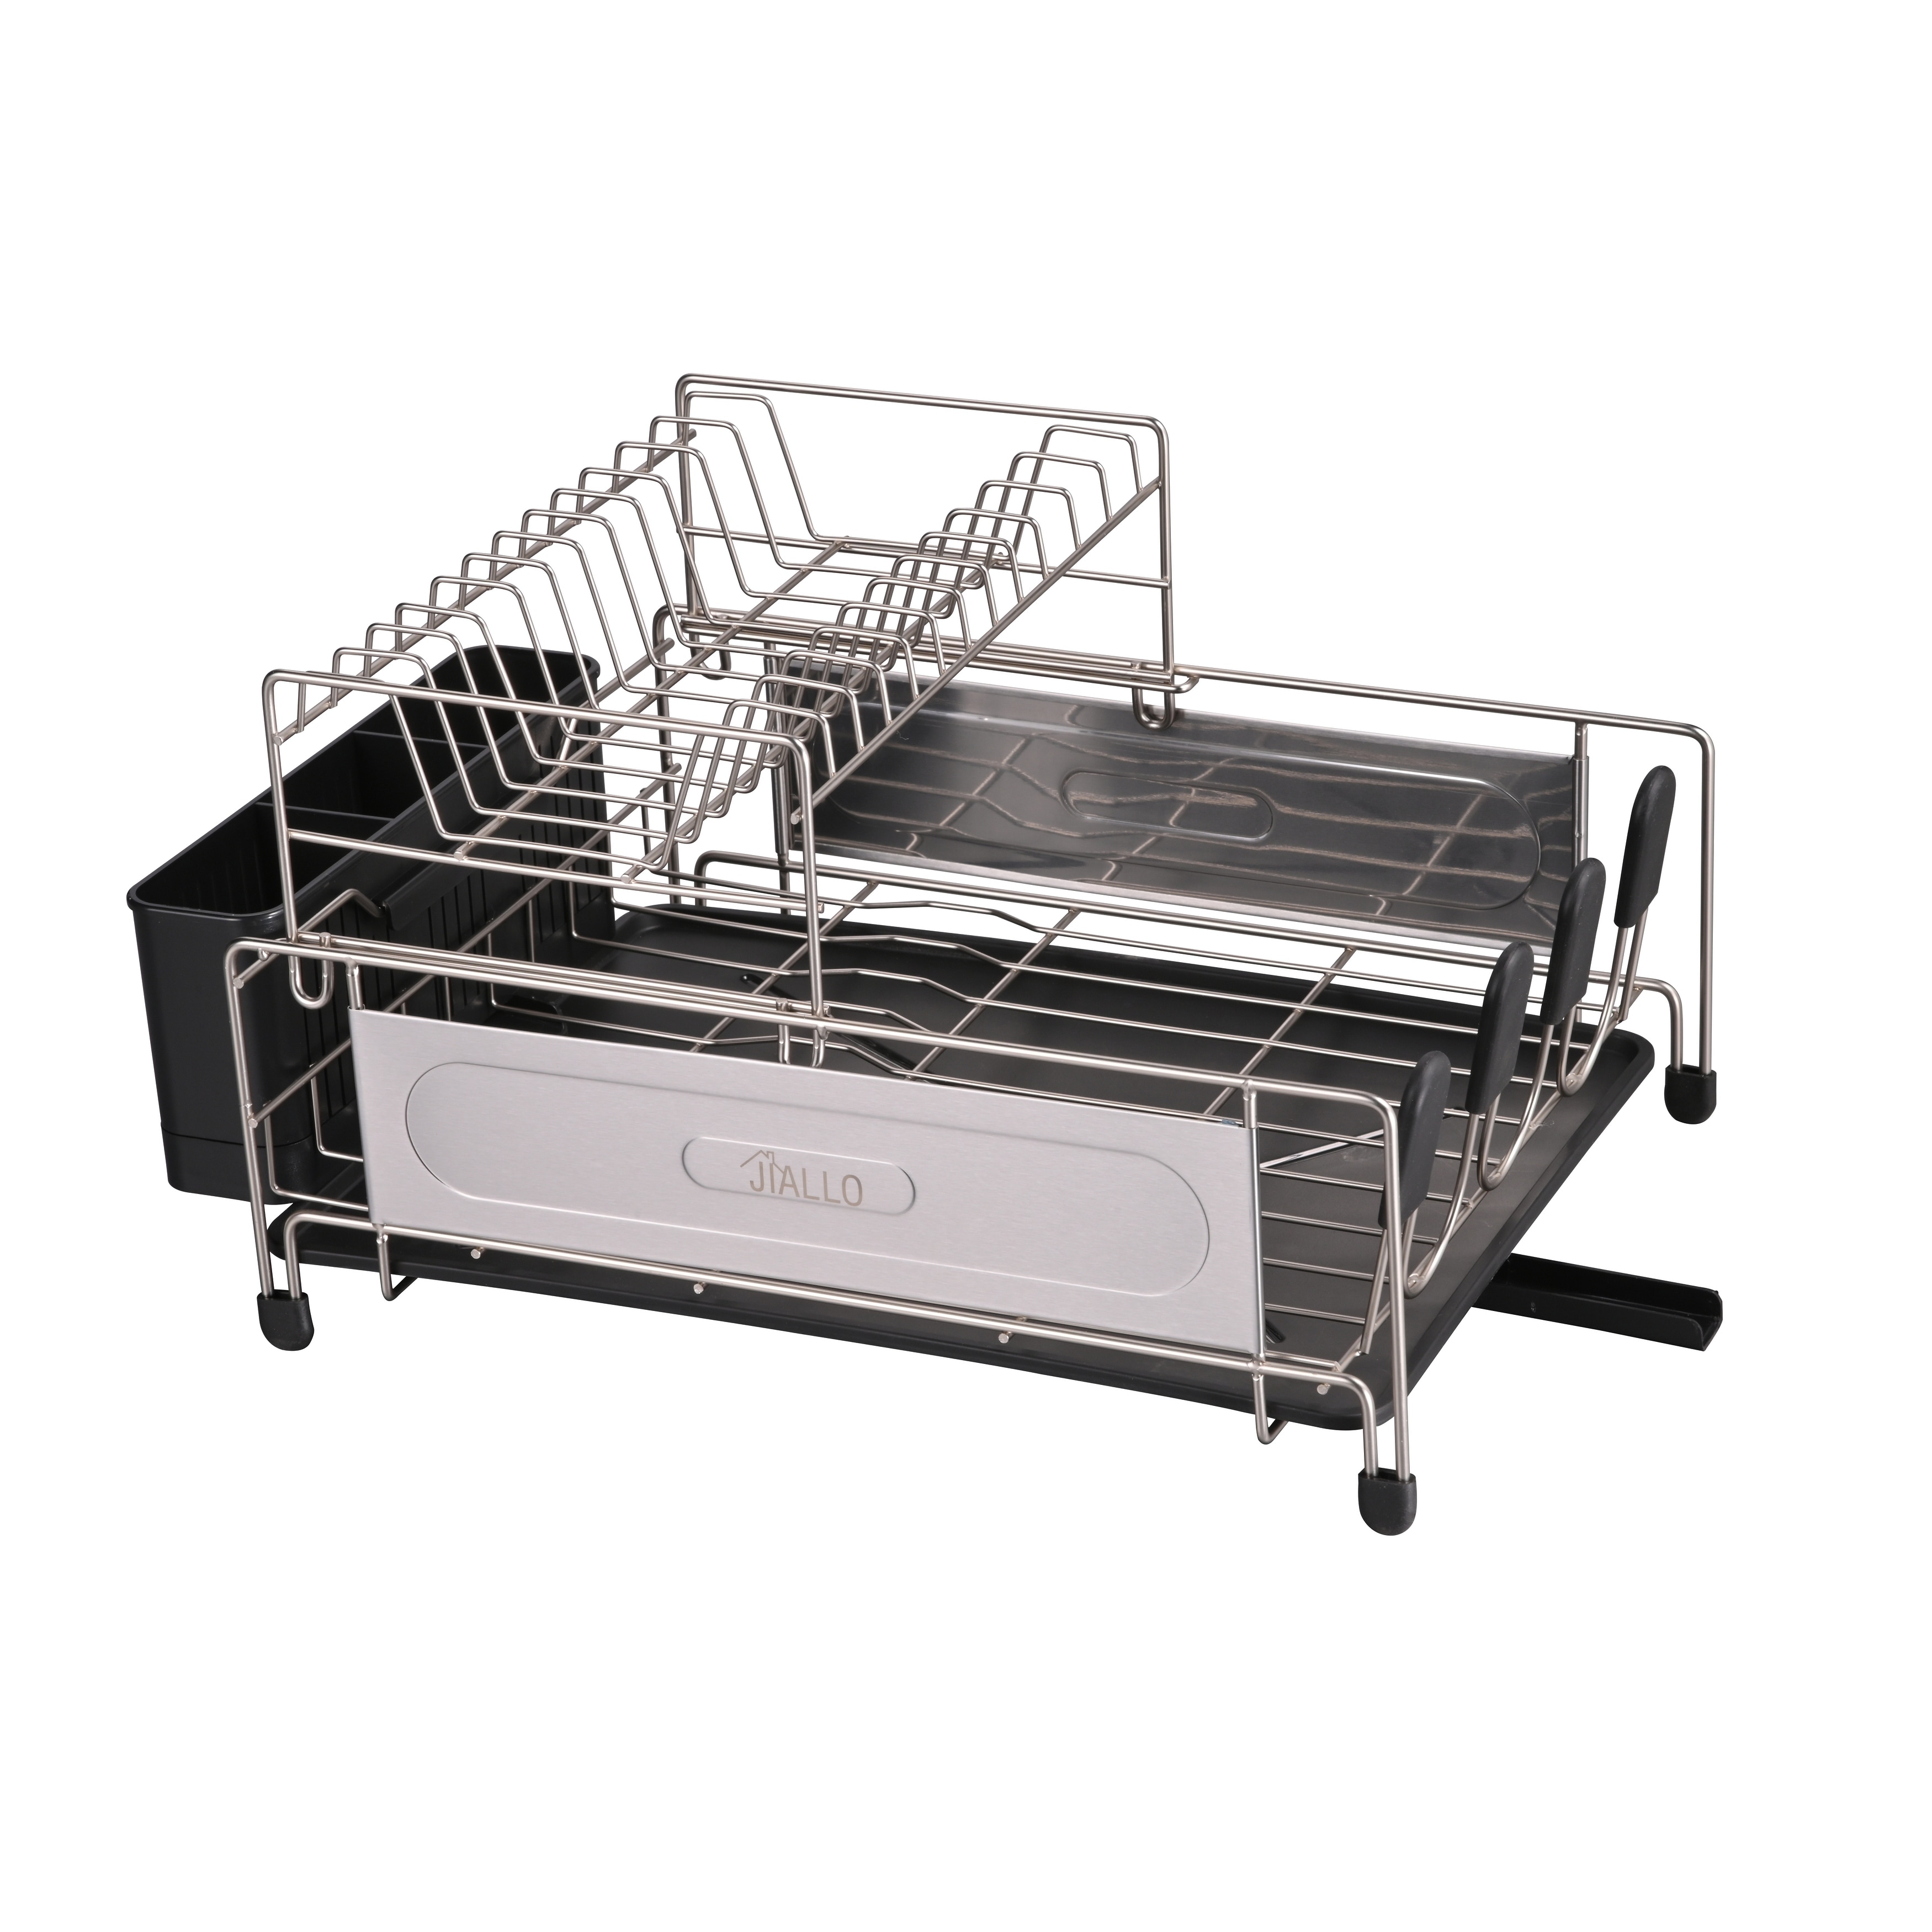 https://ak1.ostkcdn.com/images/products/is/images/direct/abfca497b01f6816c60d8ebb7651294dd44705bb/Stainless-Steel-2-Tier-dish-rack-with-self--draining-tray.jpg